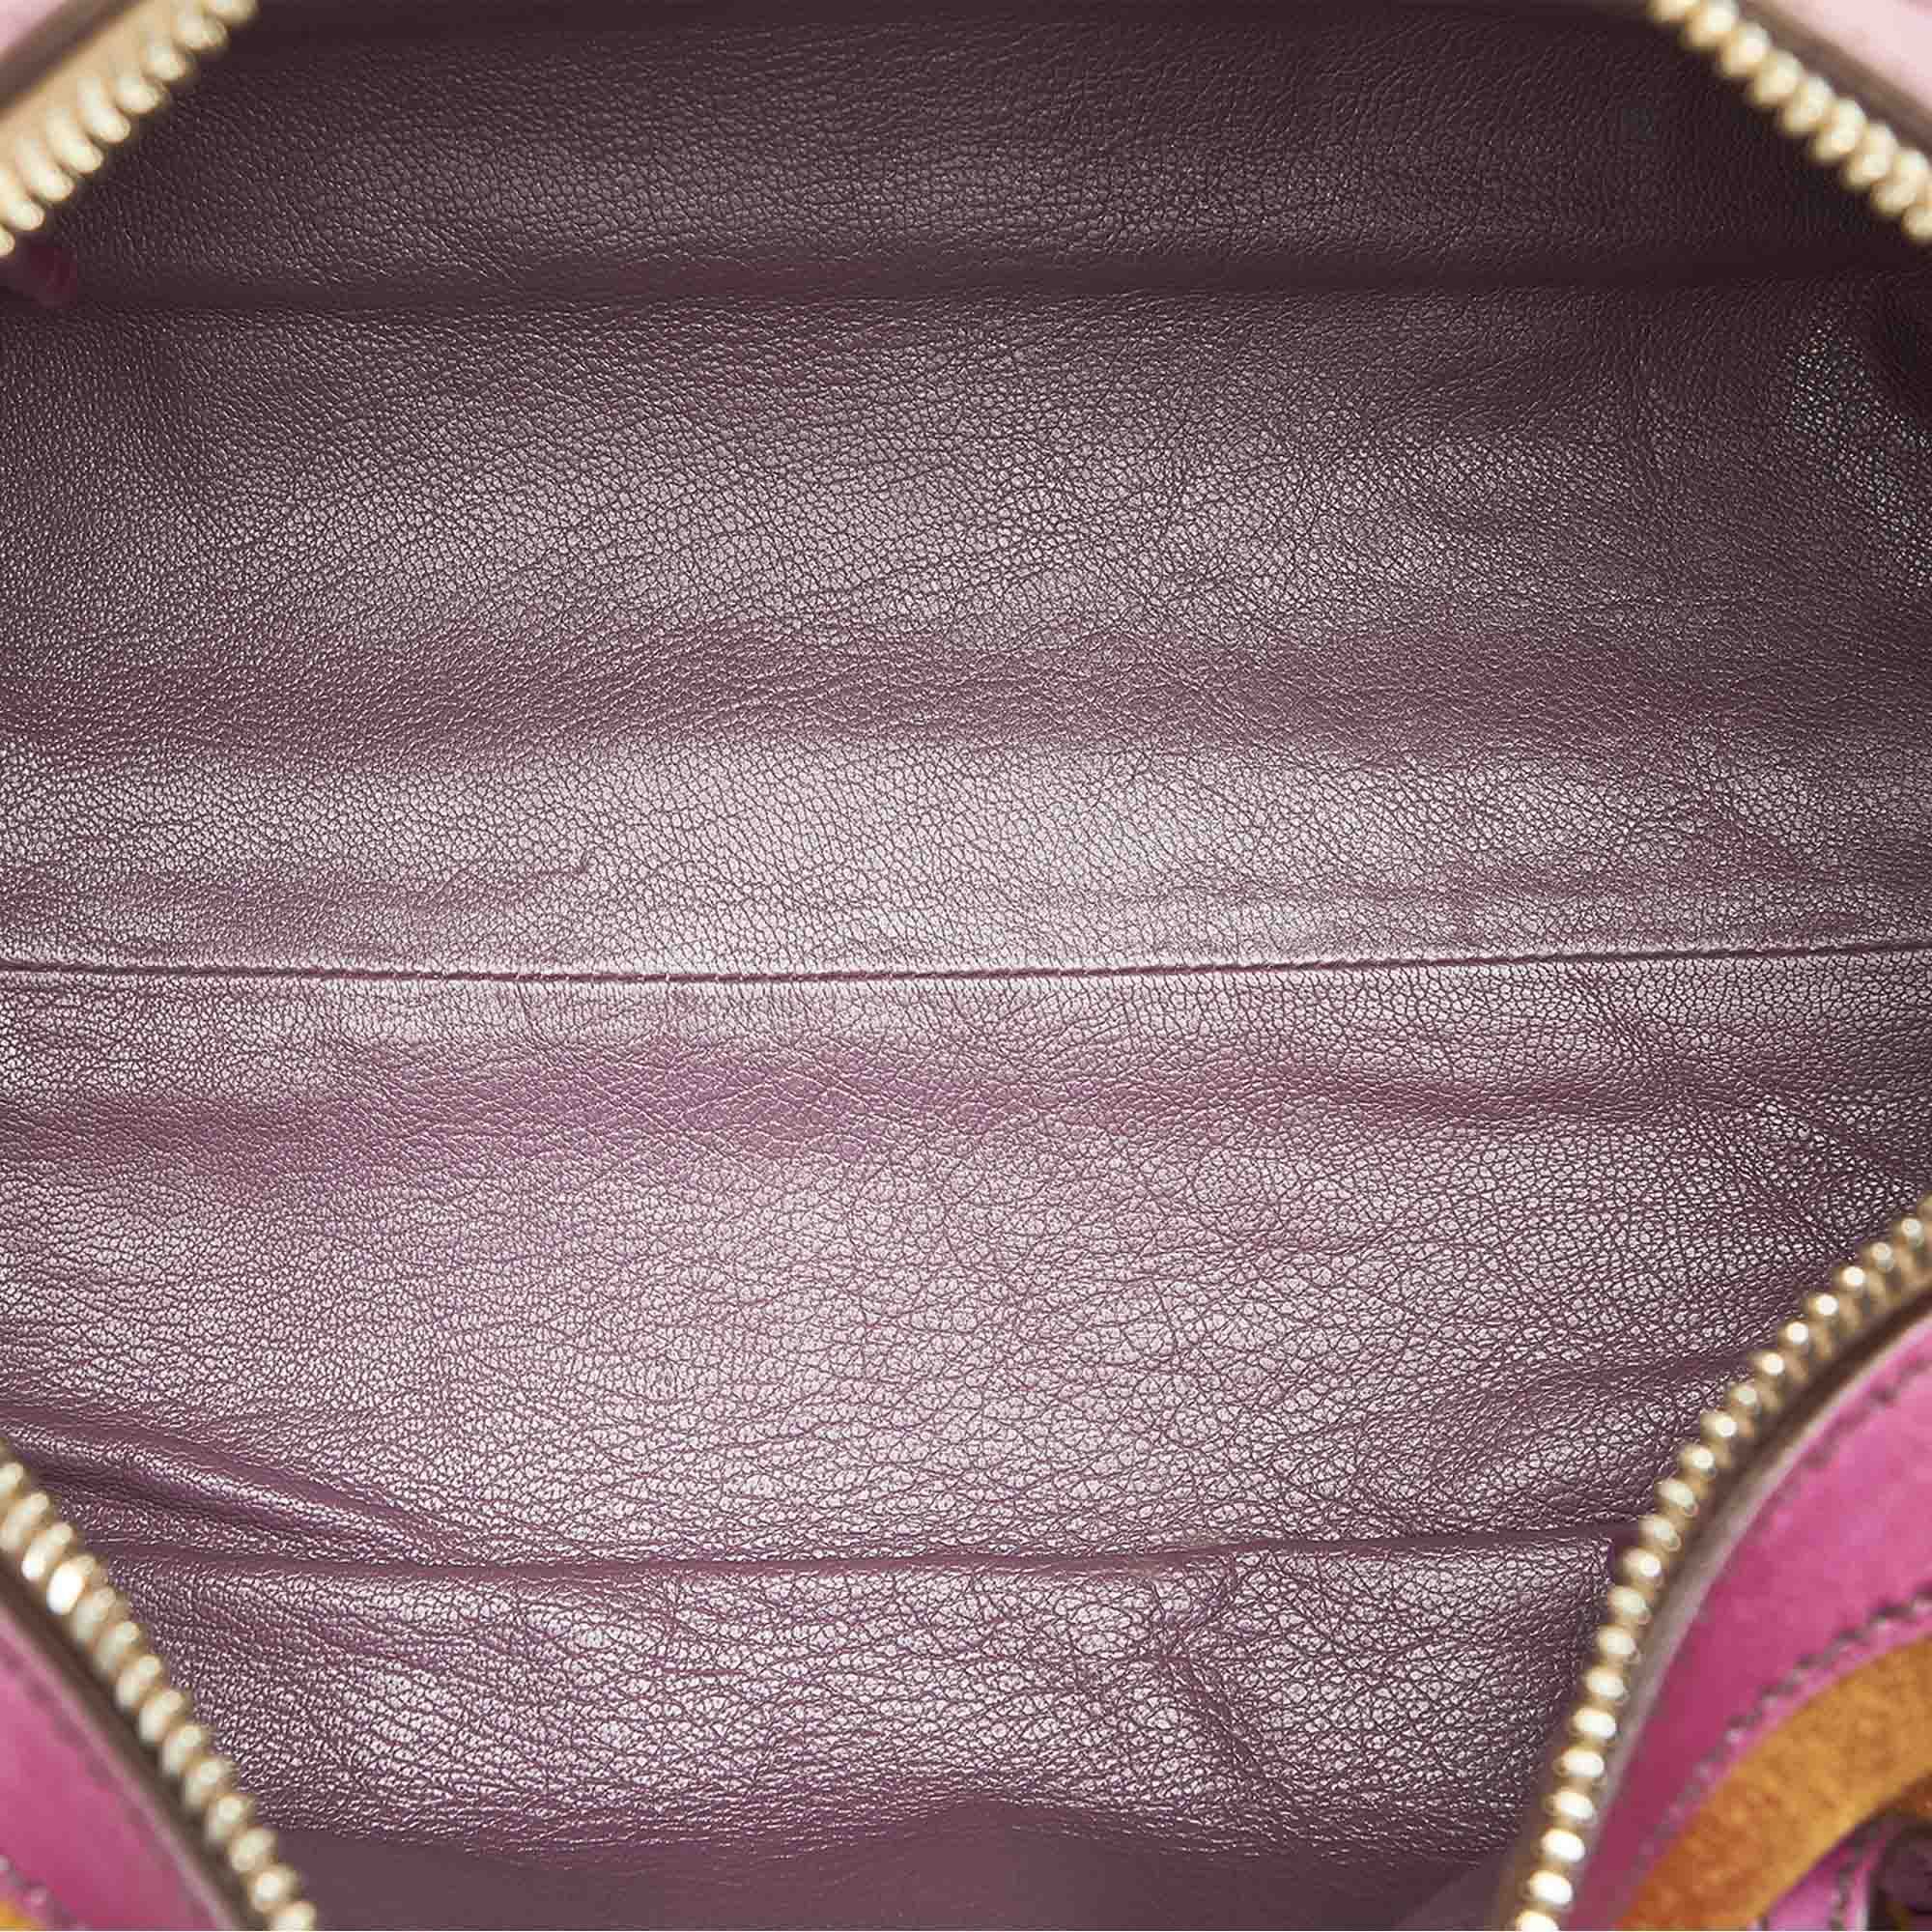 VINTAGE. RRP AS NEW. This shoulder bag features a suede leather body, flat leather straps, top zip closure, and an interior zip pocket.Exterior back is discolored and stained. Exterior bottom is discolored and stained. Exterior corners is discolored. Exterior front is discolored and stained. Exterior handle is discolored. Exterior side is discolored. Buckle is scratched and tarnished. Zipper is scratched and tarnished. Interior lining is discolored. Interior pocket is discolored.

Dimensions:
Length 14cm
Width 28cm
Depth 15cm
Shoulder Drop 23.5cm

Original Accessories: Name Tag, Dust Bag, Authenticity Card

Color: Brown x Purple
Material: Leather x Suede x Leather x Calf
Country of Origin: Italy
Boutique Reference: SSU95110K1342


Product Rating: GoodCondition